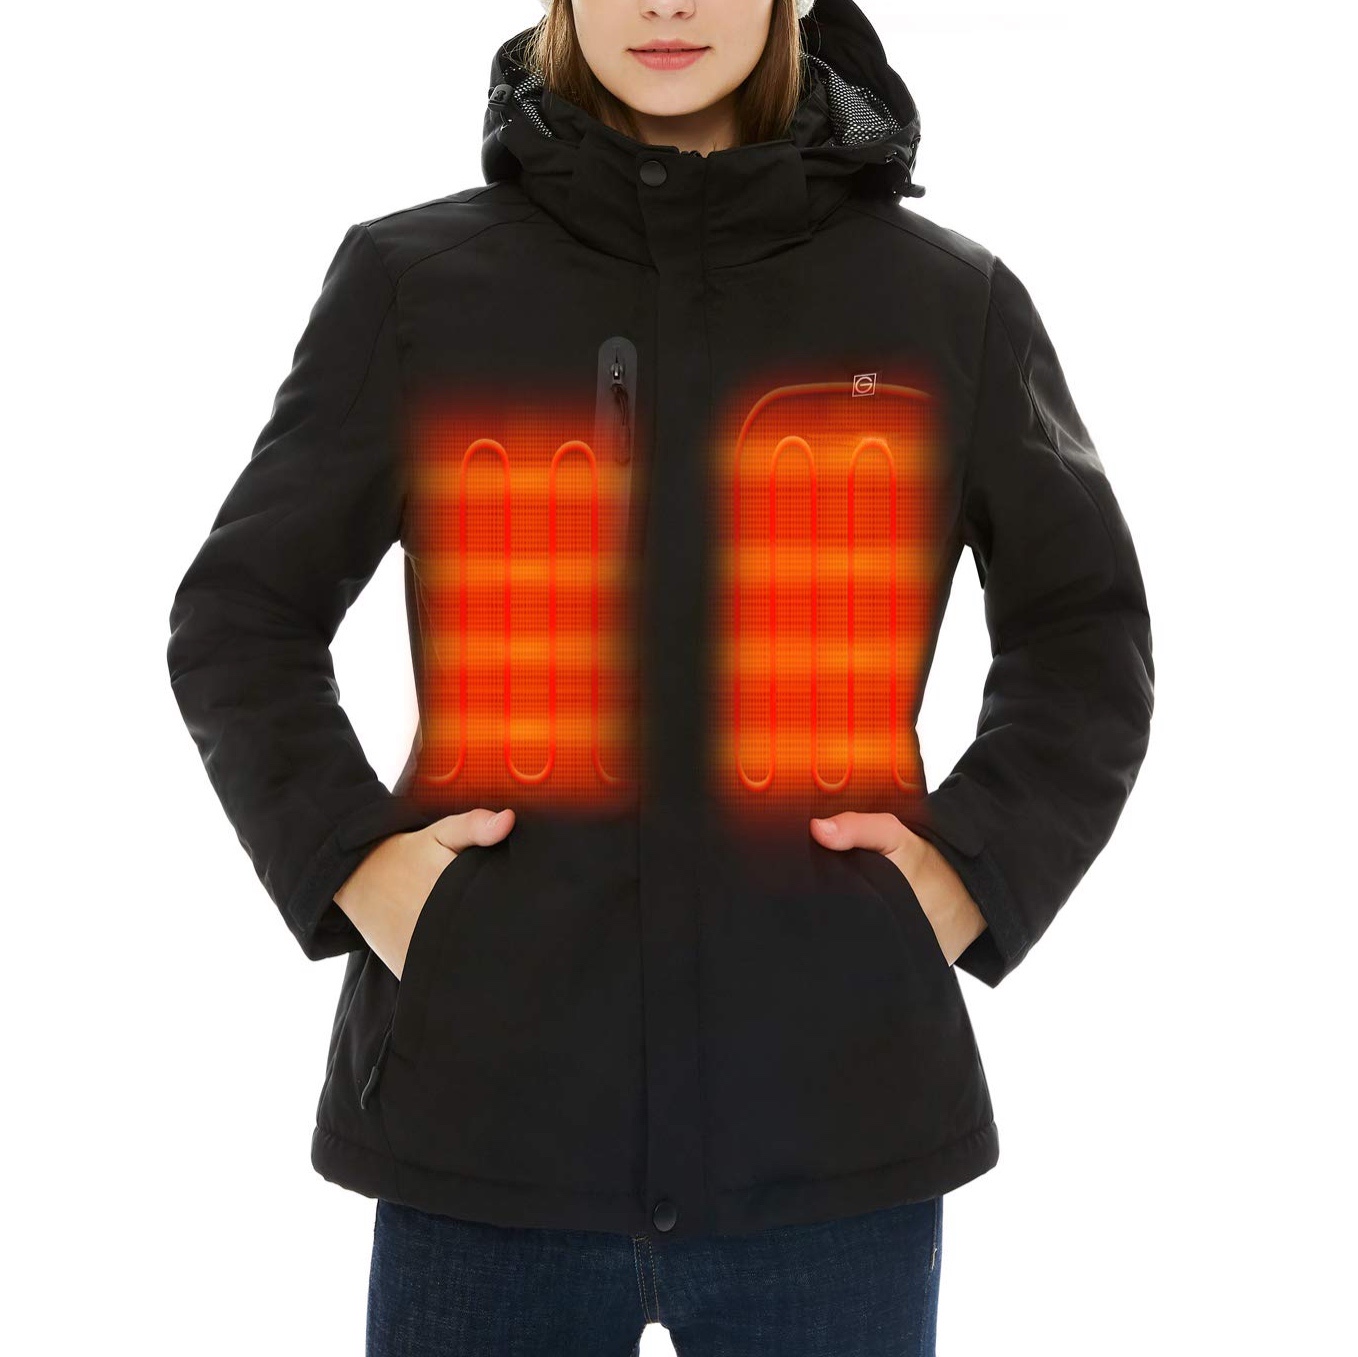 Women's Heated Jacket with Battery Pack 5V, Heated Coat with Detachable Hood Windproof